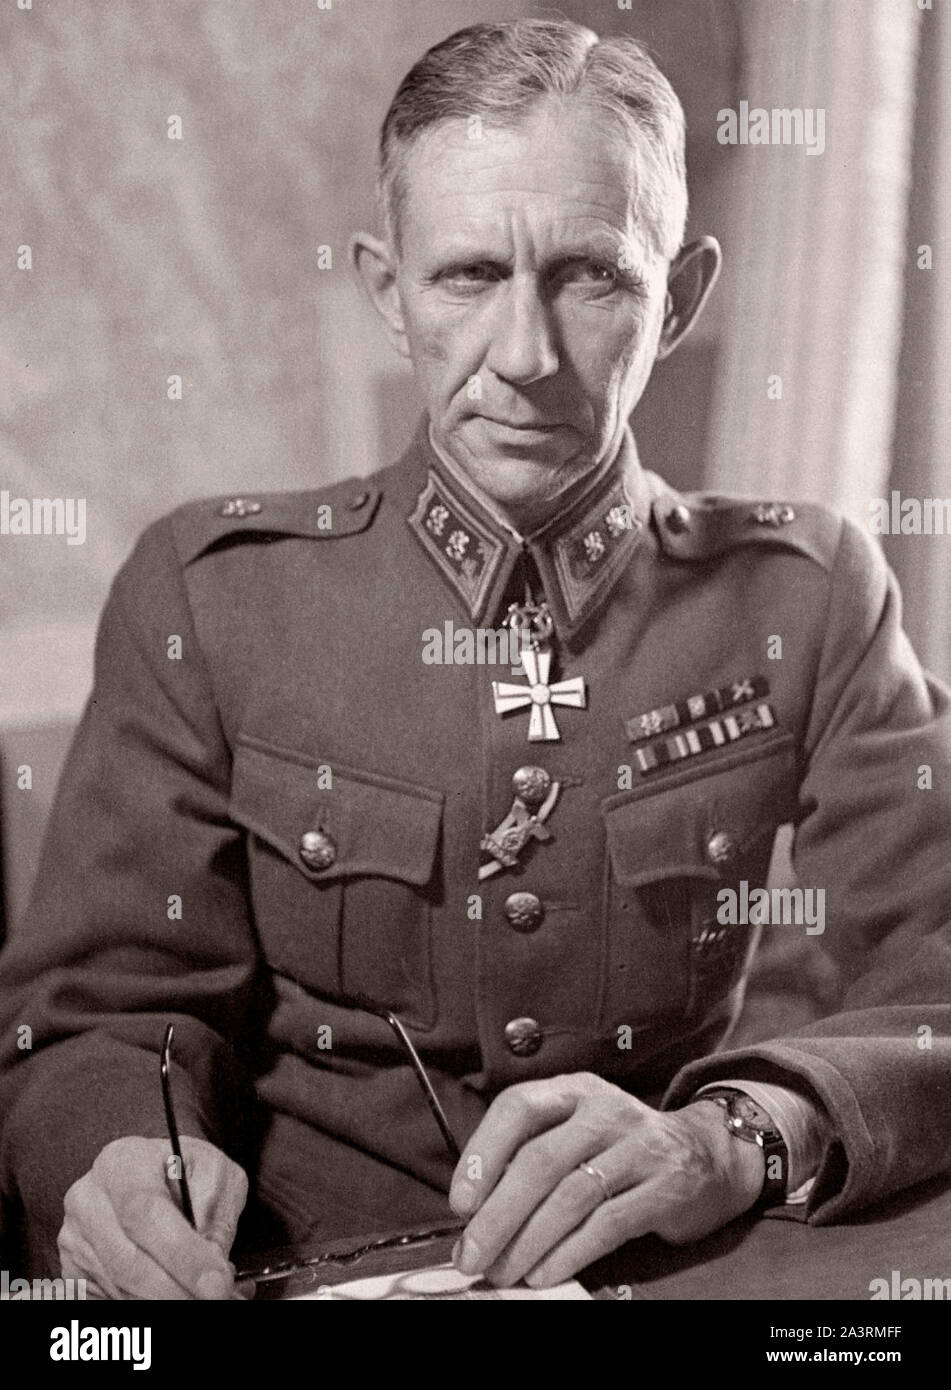 Harald Ohquist (Harald Öhquist, 1891-1971) was a Finnish Lieutenant General and jaeger, from an ethnic Swedish family. Stock Photo